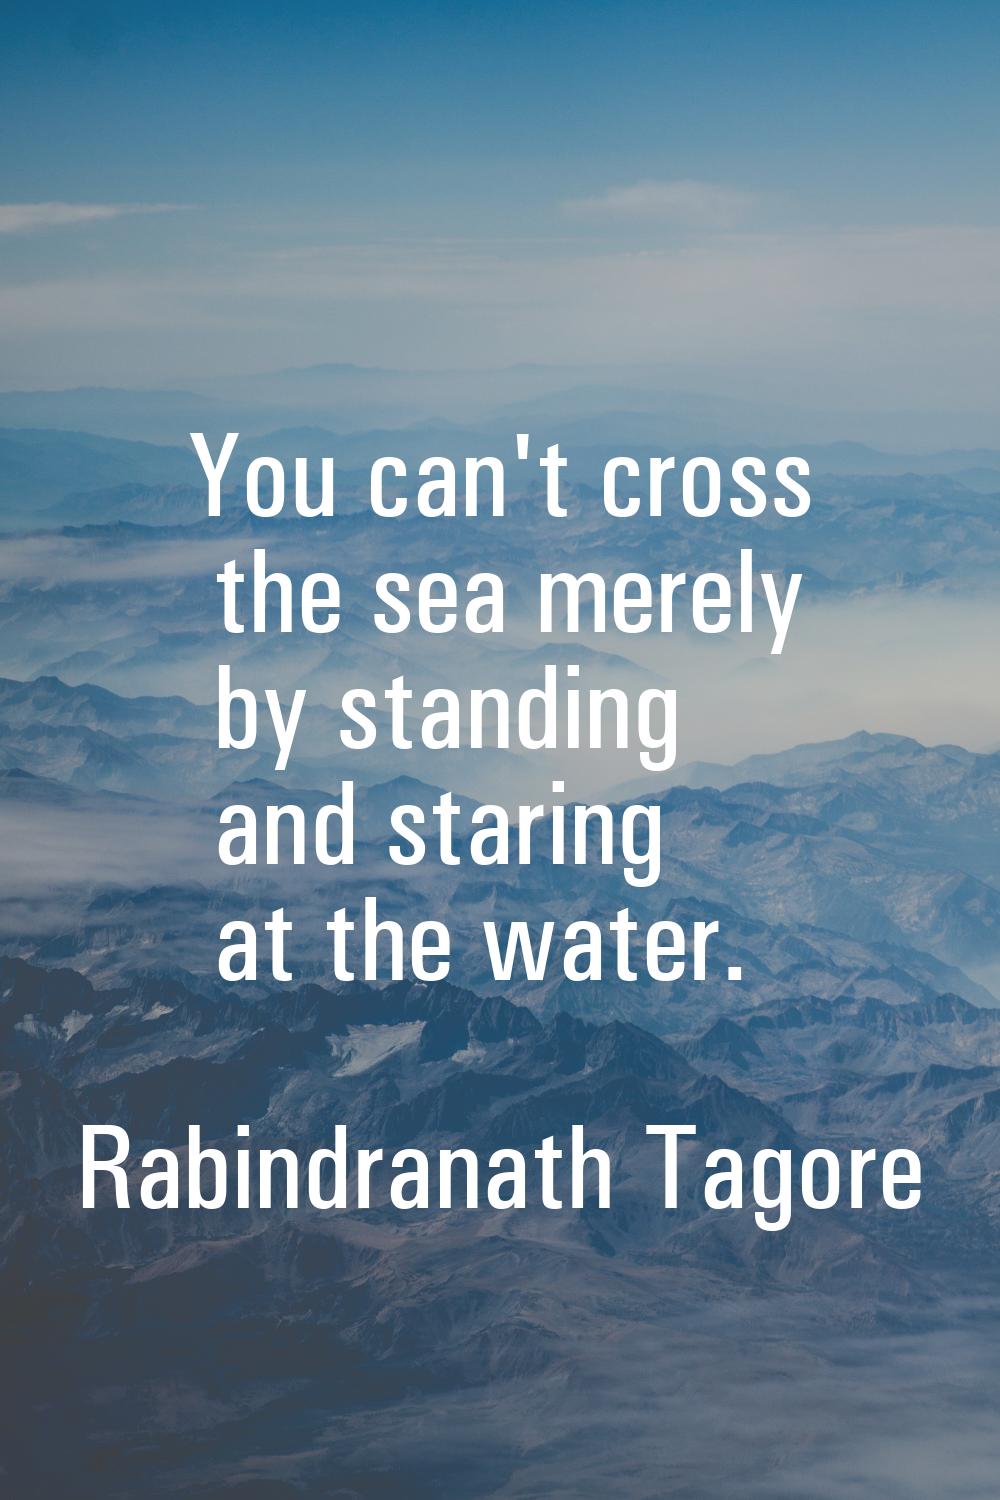 You can't cross the sea merely by standing and staring at the water.